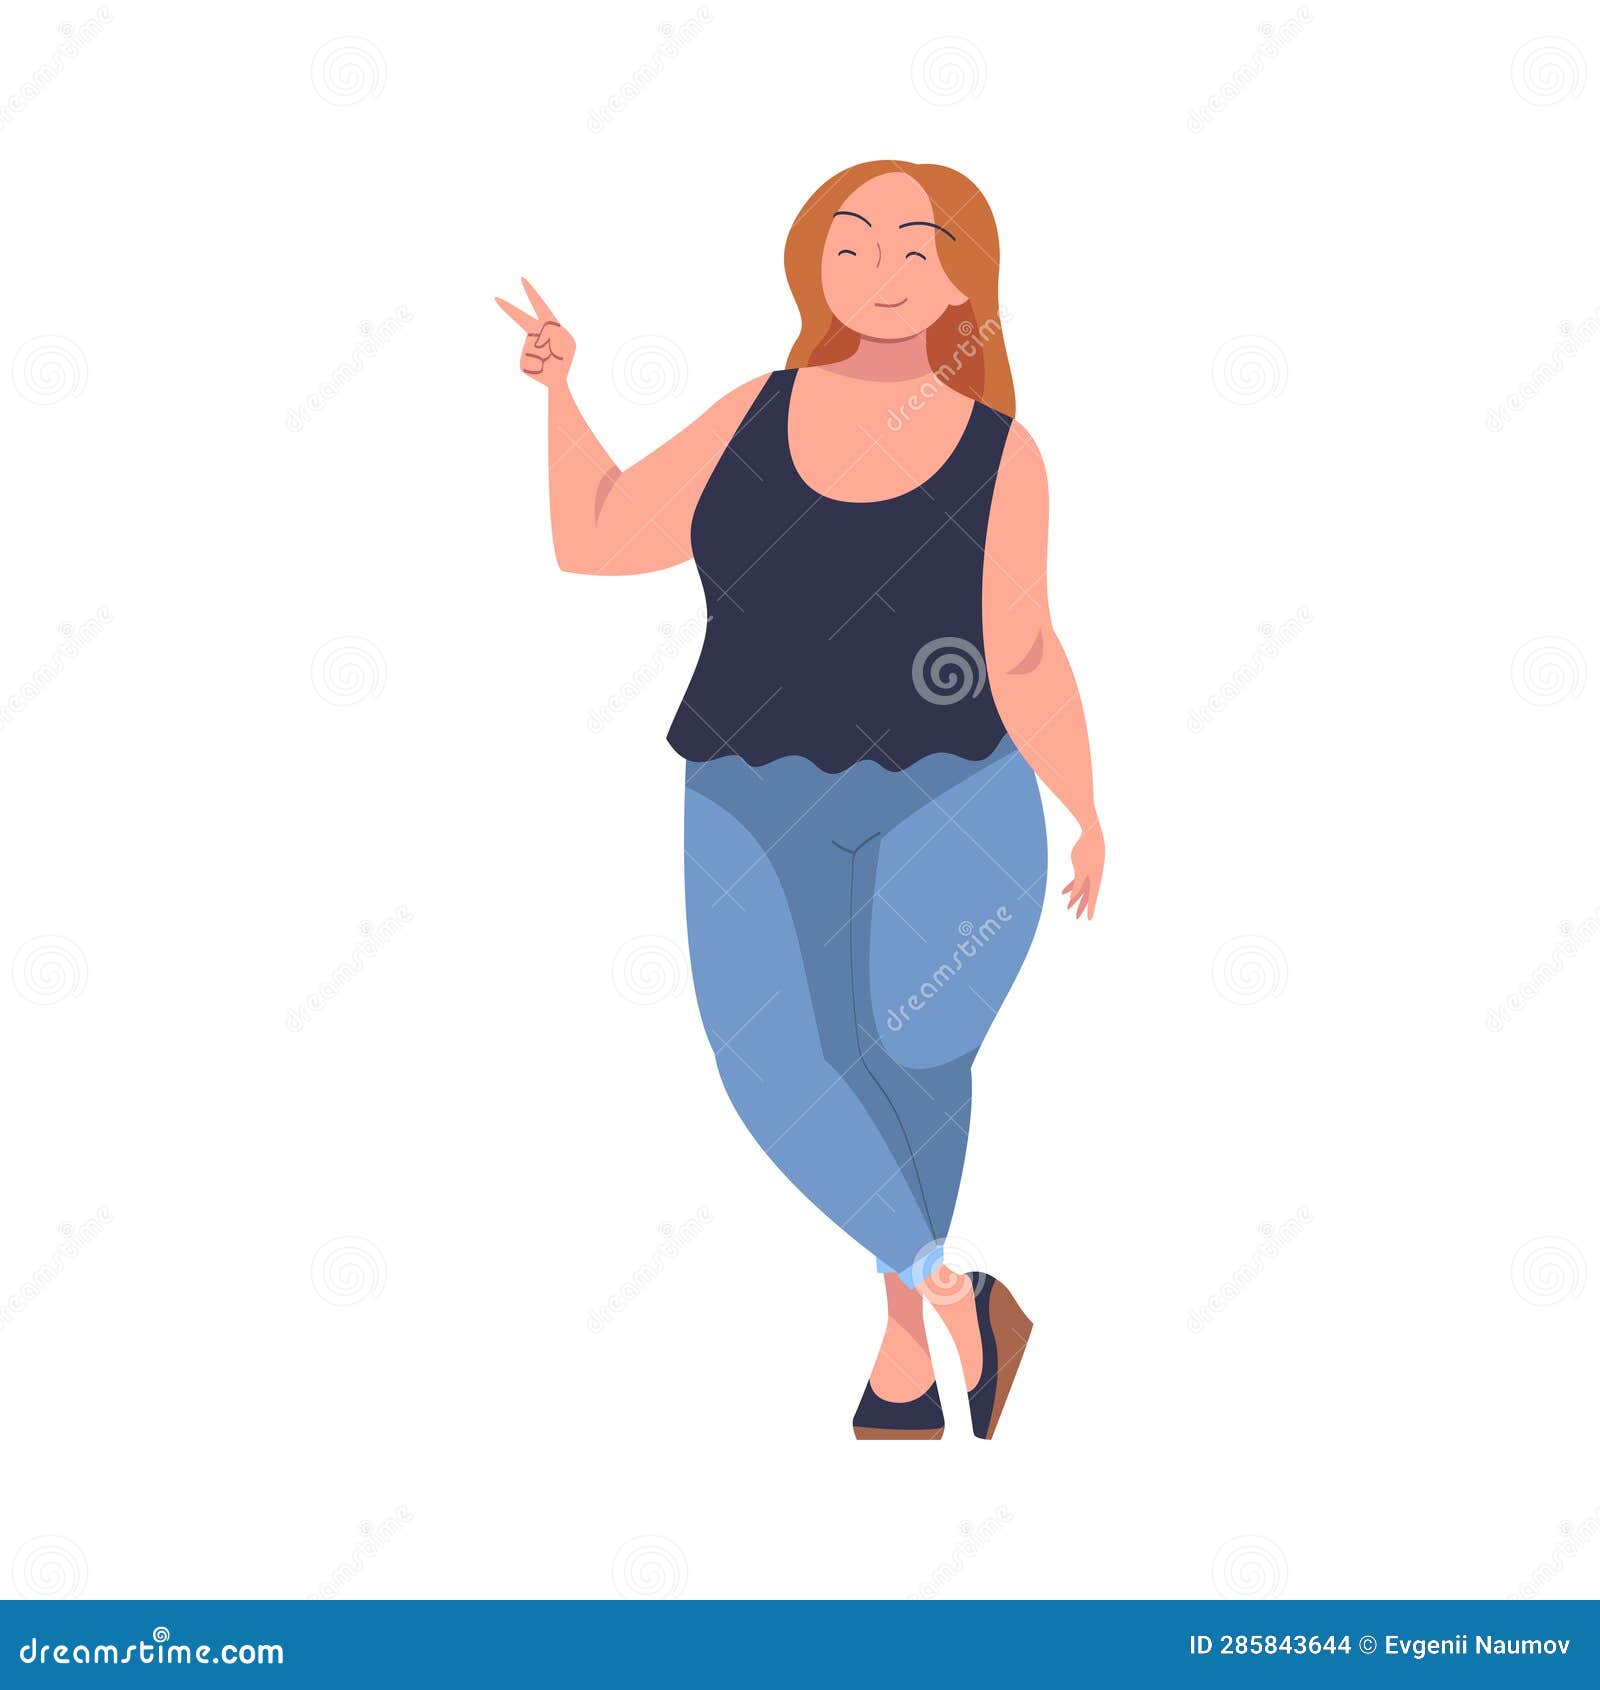 Full Woman Character with Plump Body Standing and Smiling Vector  Illustration Stock Vector - Illustration of fullfigured, character:  285843644